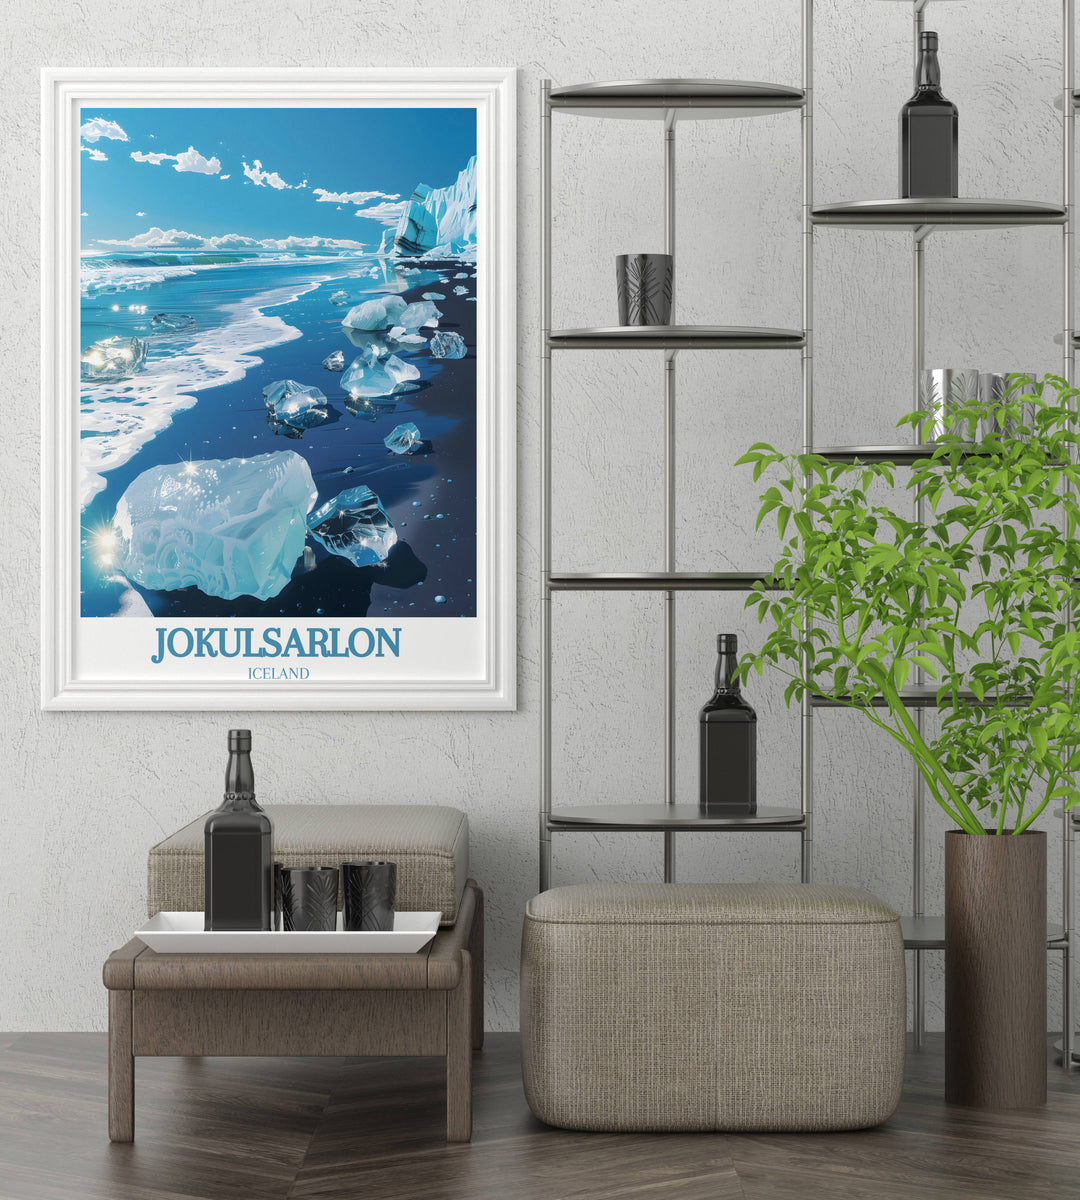 Adorn your walls with the captivating beauty of Diamond Beach jokulsarlon, captured in this exquisite print, showcasing the contrast of icebergs and black sand